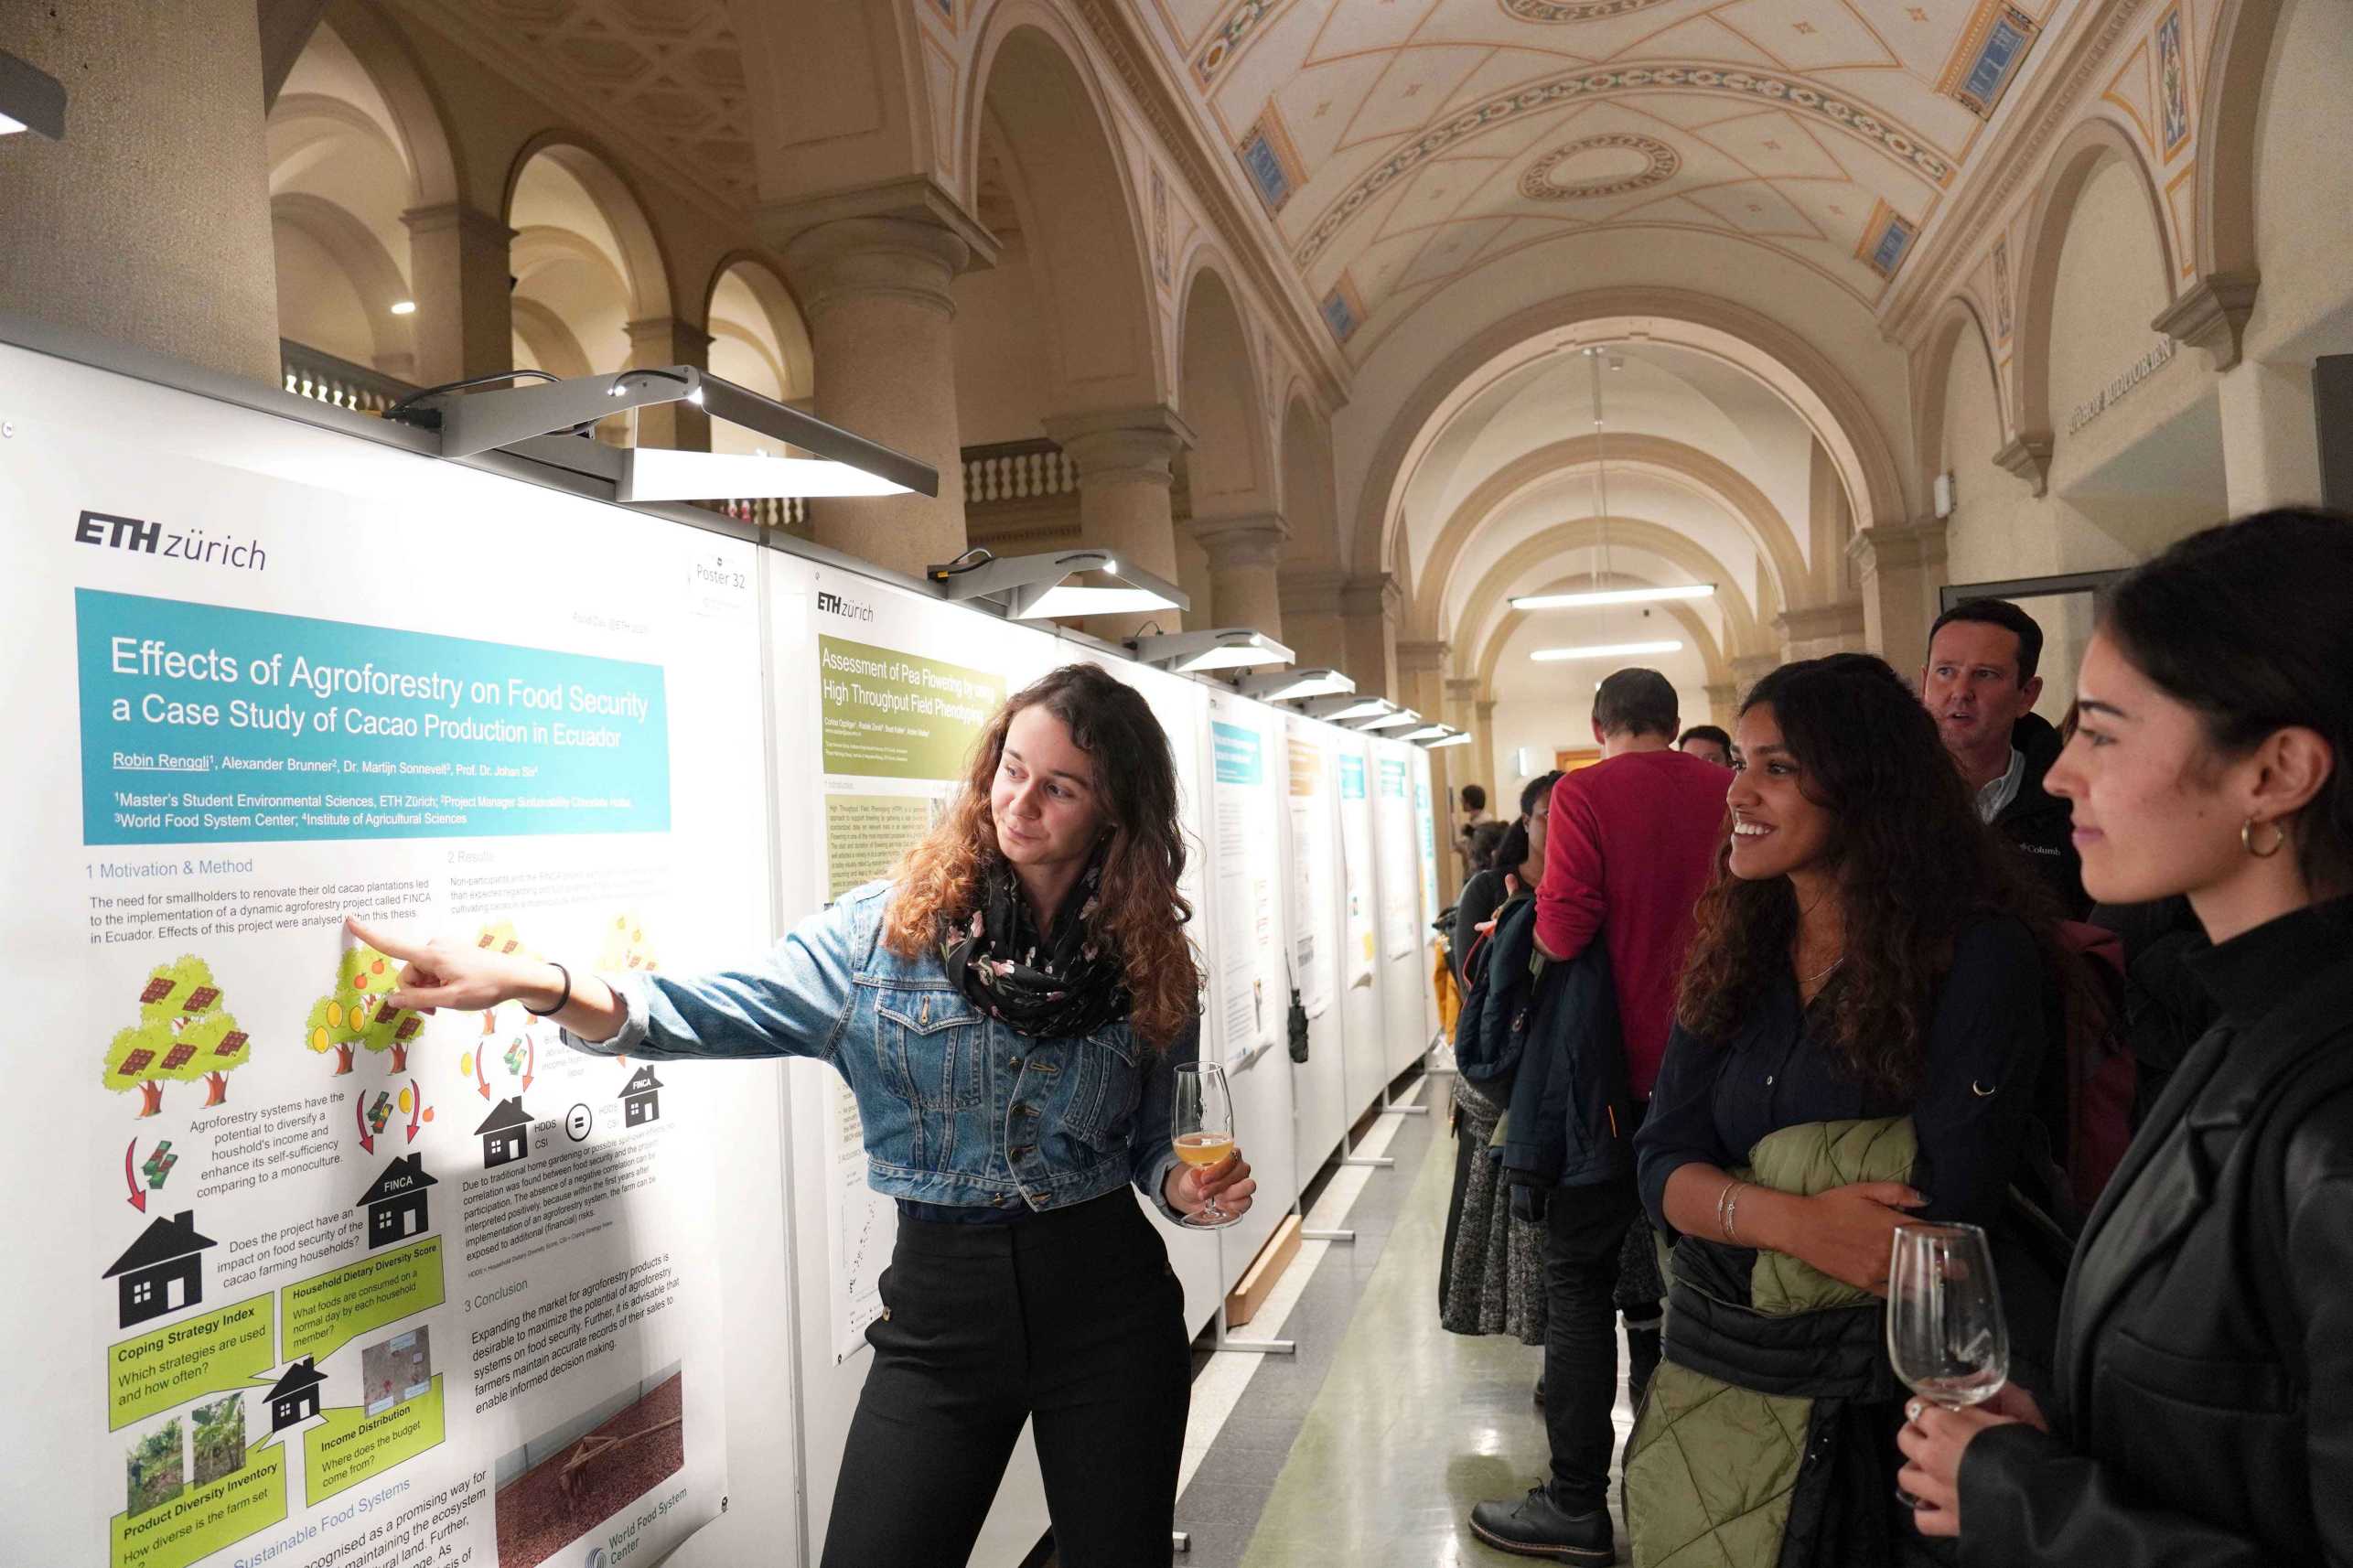 Discussions during the Networking Poster Session (Image: WFSC/Selina Hess).